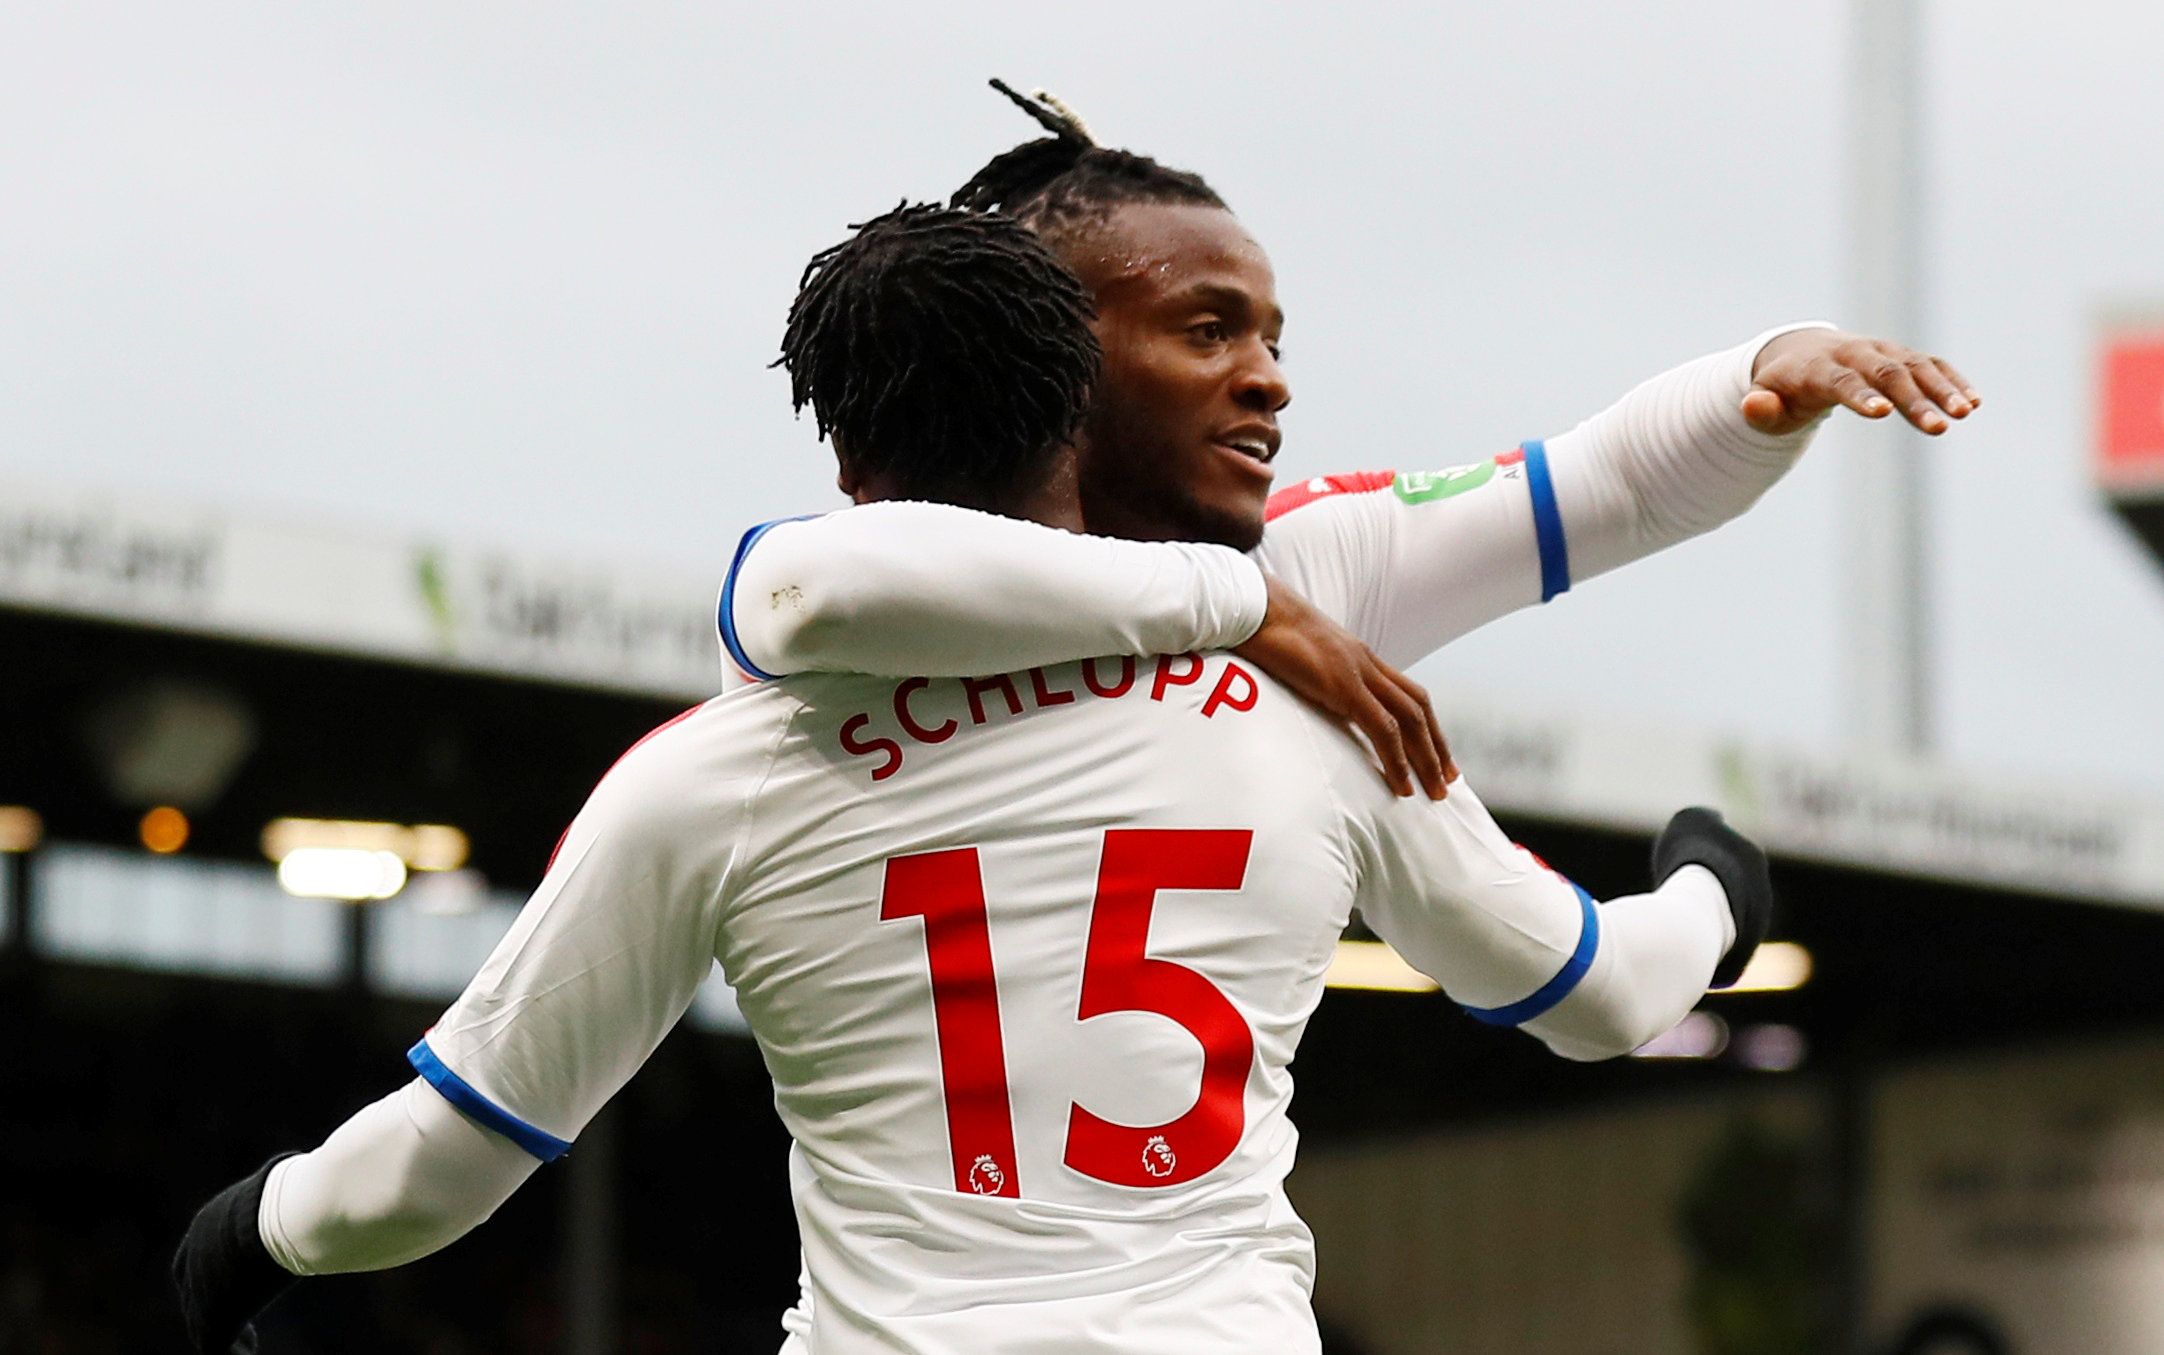 Soccer Football - Premier League - Burnley v Crystal Palace - Turf Moor, Burnley, Britain - March 2, 2019  Crystal Palace's Michy Batshuayi celebrates their first goal with Jeffrey Schlupp   Action Images via Reuters/Jason Cairnduff  EDITORIAL USE ONLY. No use with unauthorized audio, video, data, fixture lists, club/league logos or "live" services. Online in-match use limited to 75 images, no video emulation. No use in betting, games or single club/league/player publications.  Please contact yo